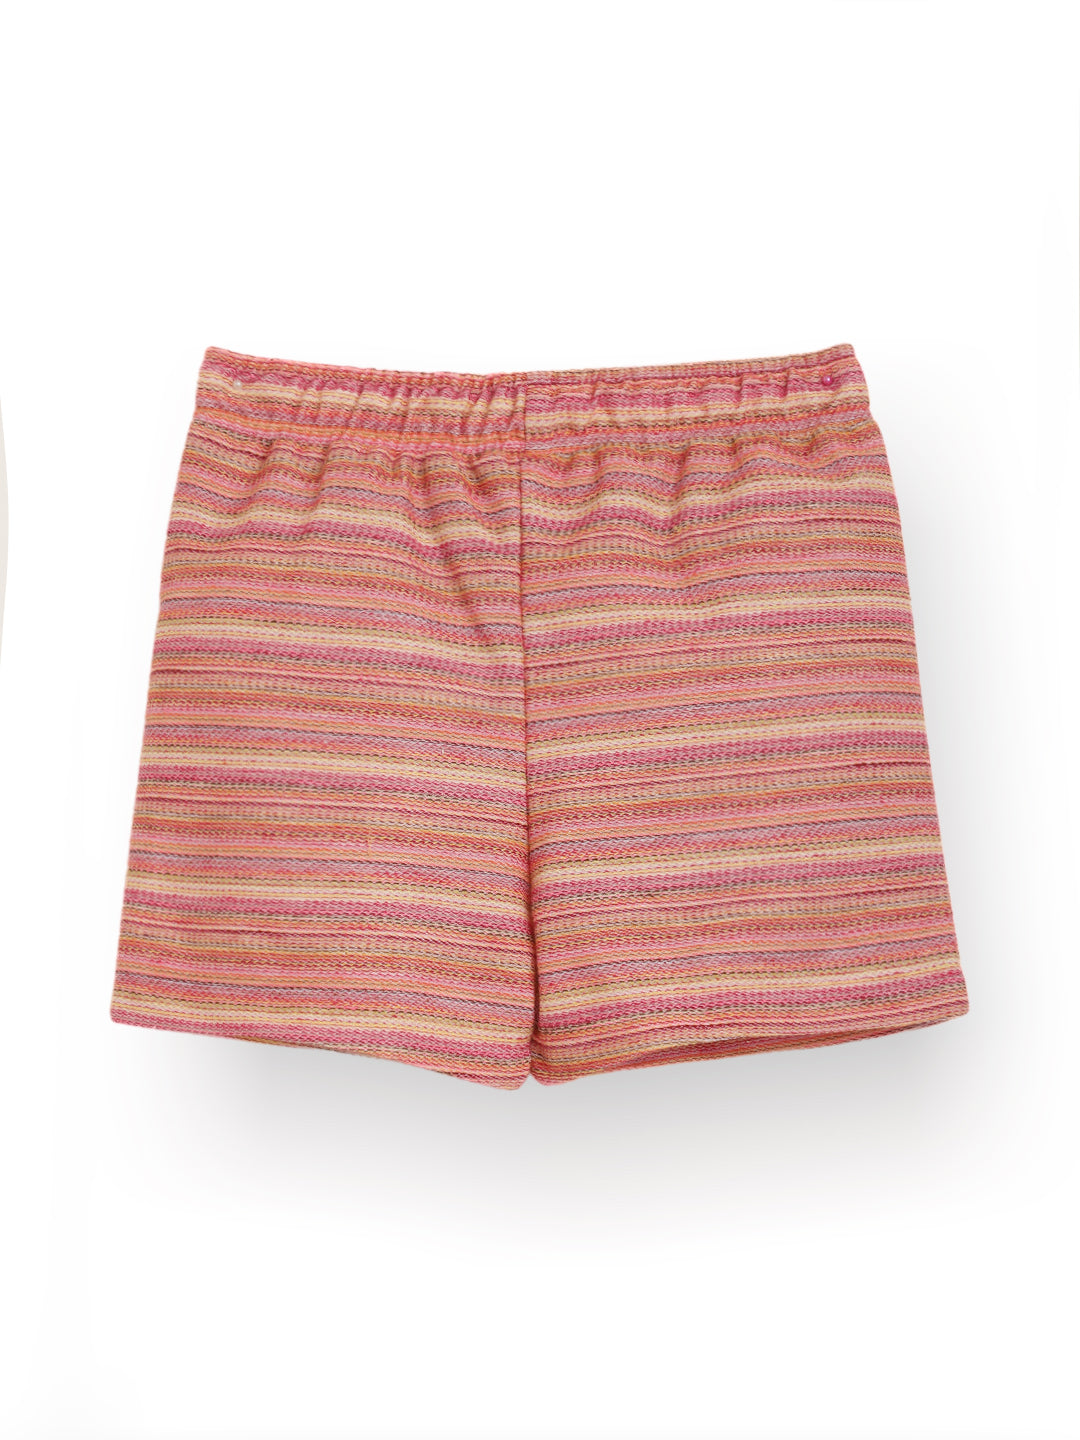 PINK TEXTURED COLORFUL GIRLS SHORTS -PINK